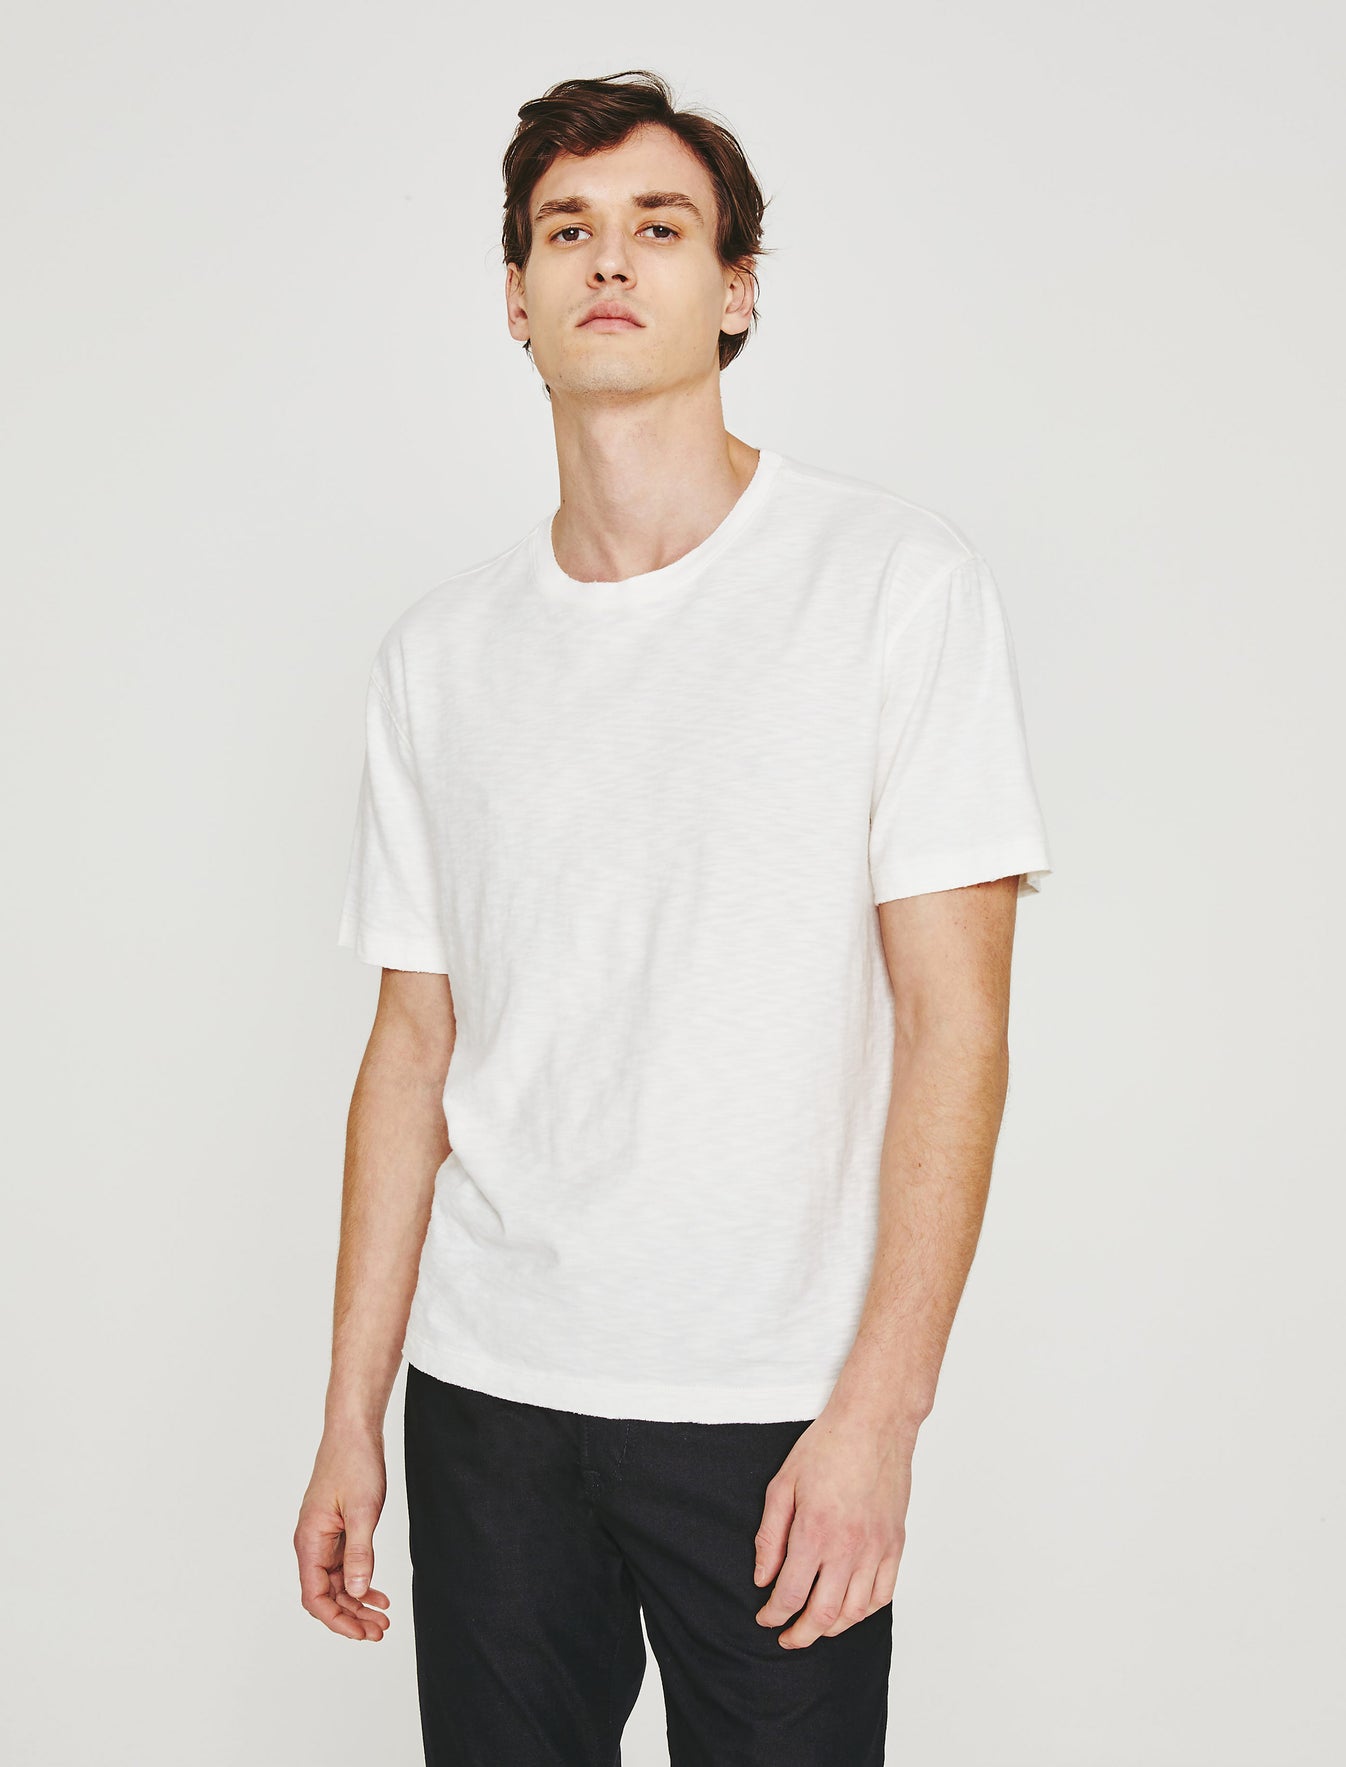 Wesley Crew 5 Years True White Relaxed T-Shirt Men Top  Photo 2